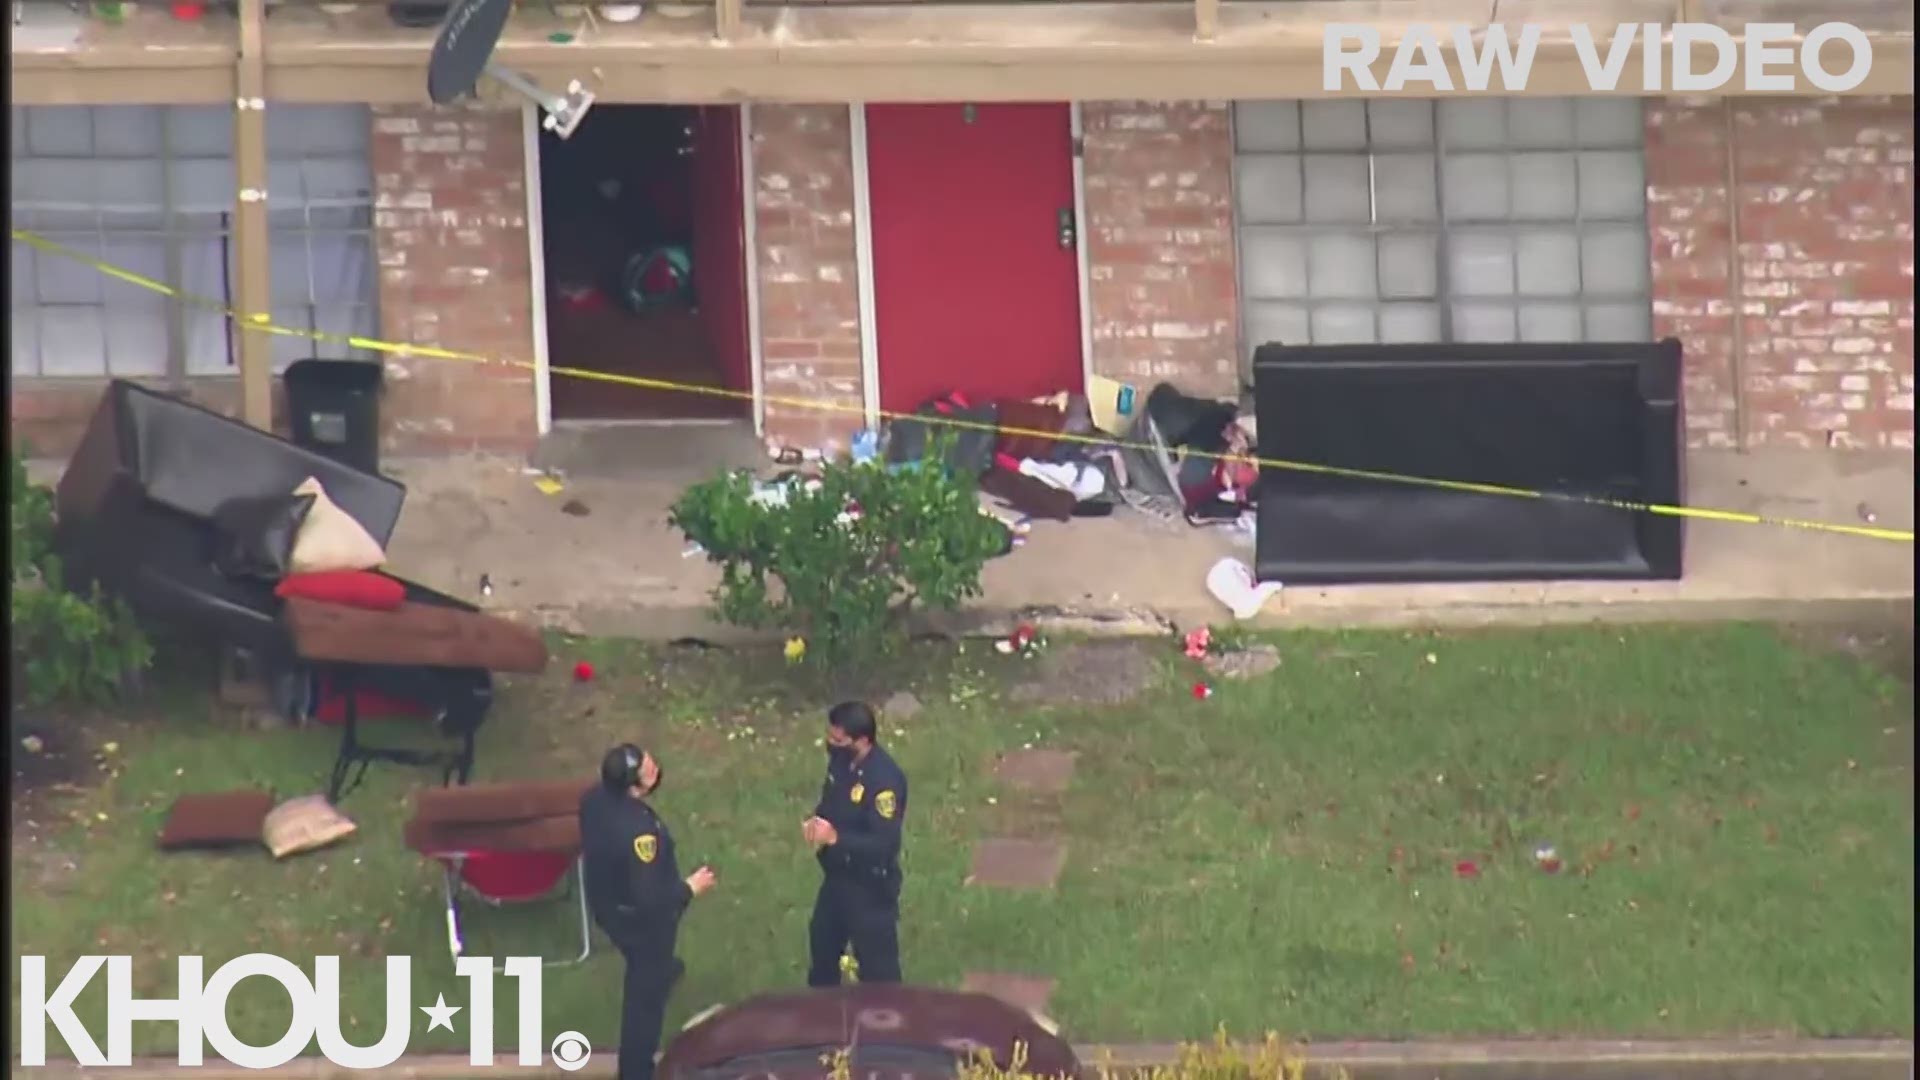 Houston police said a child was shot in a possible domestic incident Friday in southwest Houston. Two adults were detained.